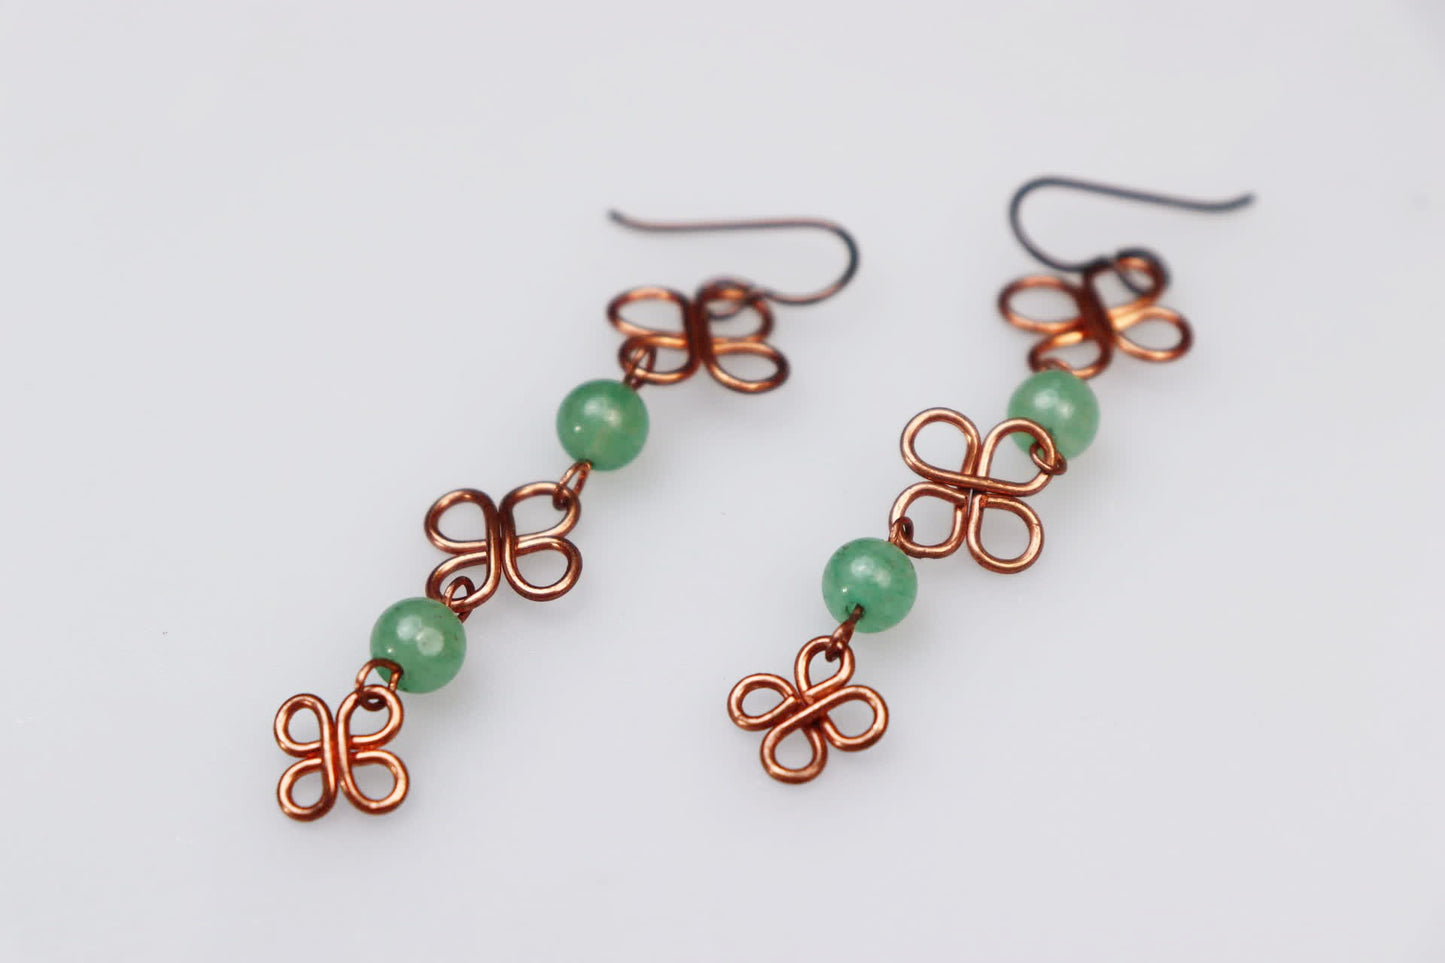 Three Tier Clover Drops in Copper and Jade Earrings